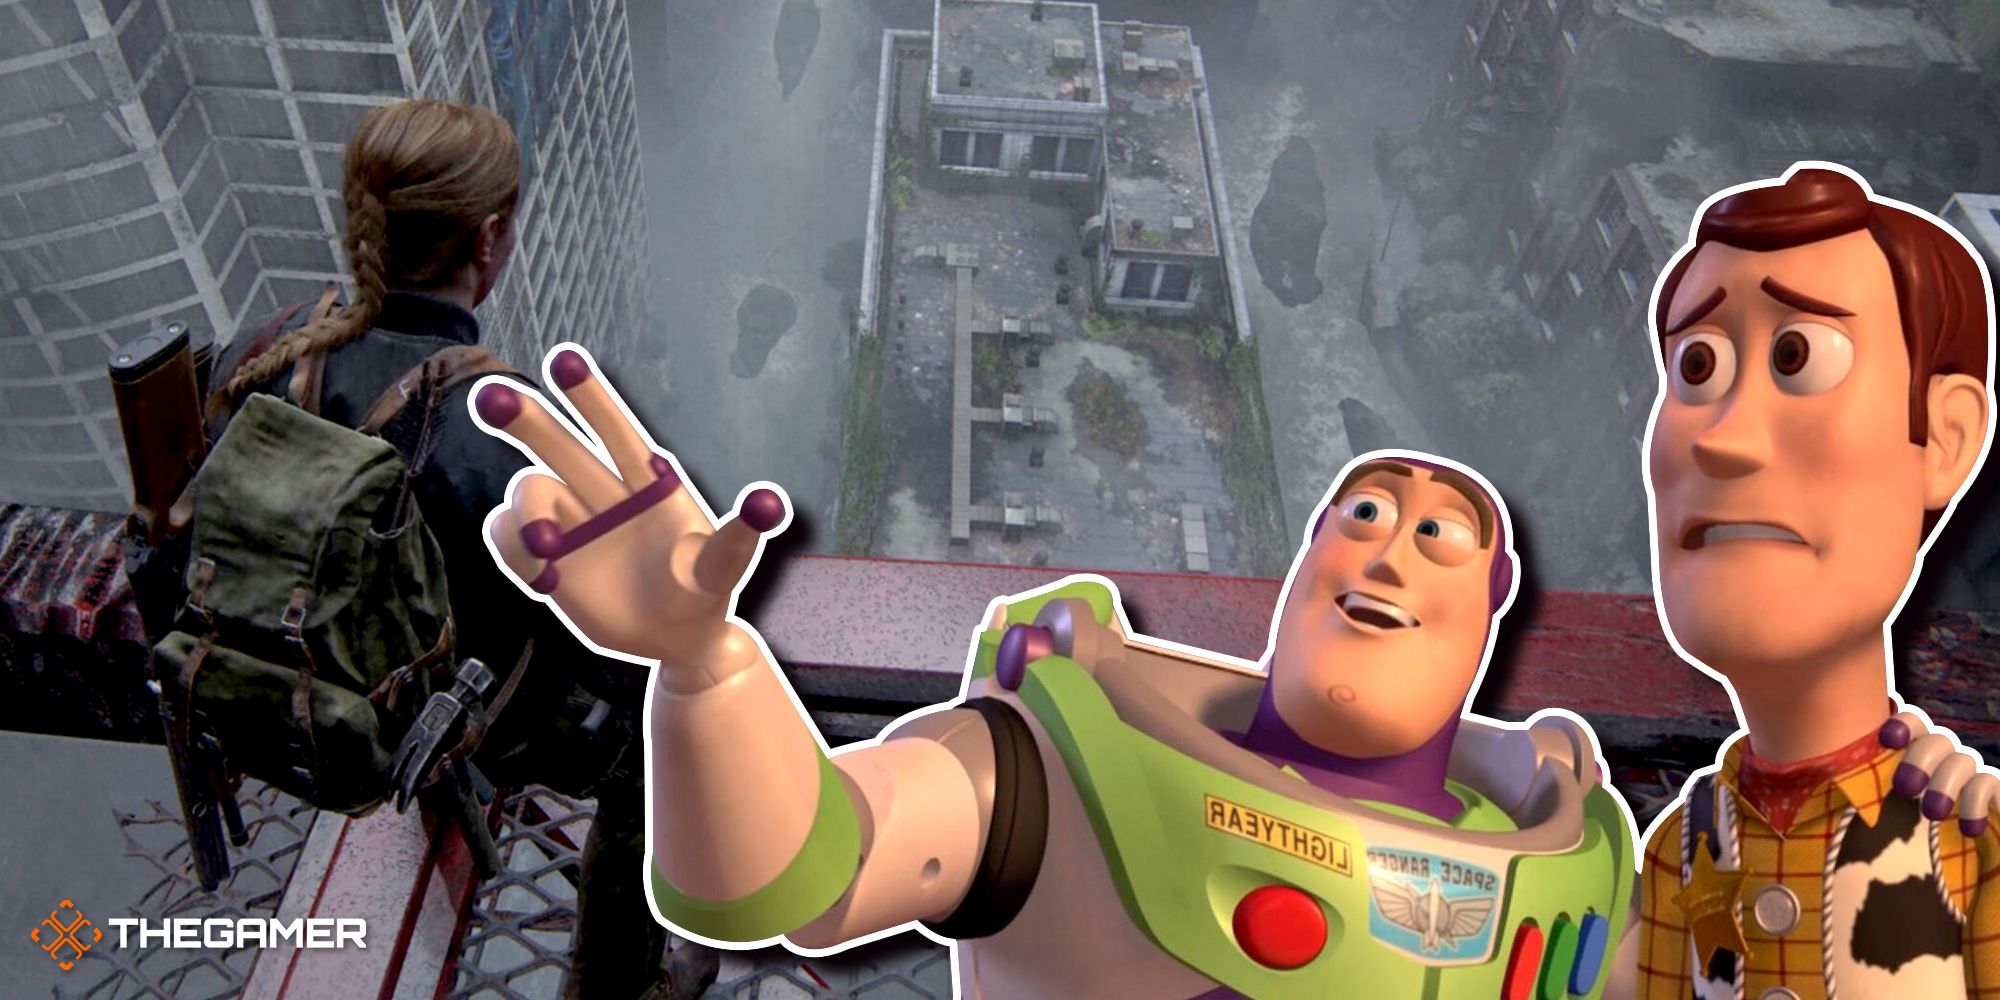 Abby looking down on Seattle from the girder, with Toy Story's Buzz pointing ahead and Woody looking scared